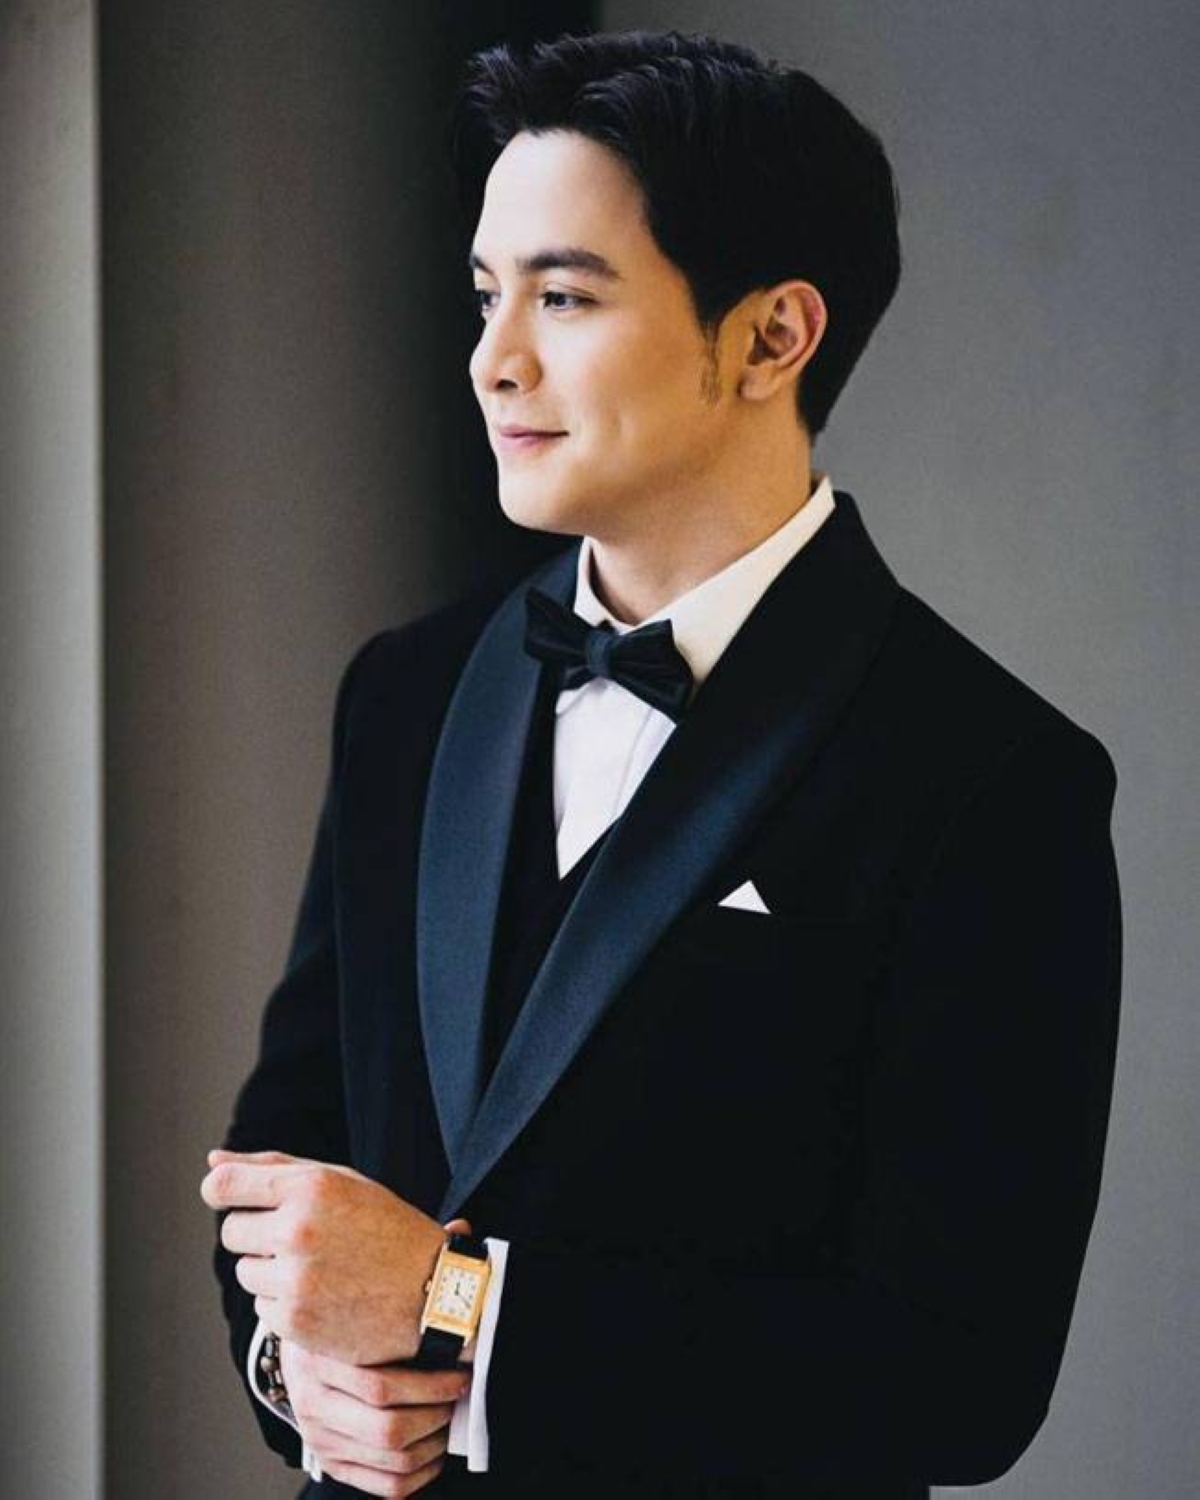 At the very least, the ‘Asia’s Multimedia Star’ should be able to pick his handler. INSTAGRAM PHOTO/ALDENRICHARDS02